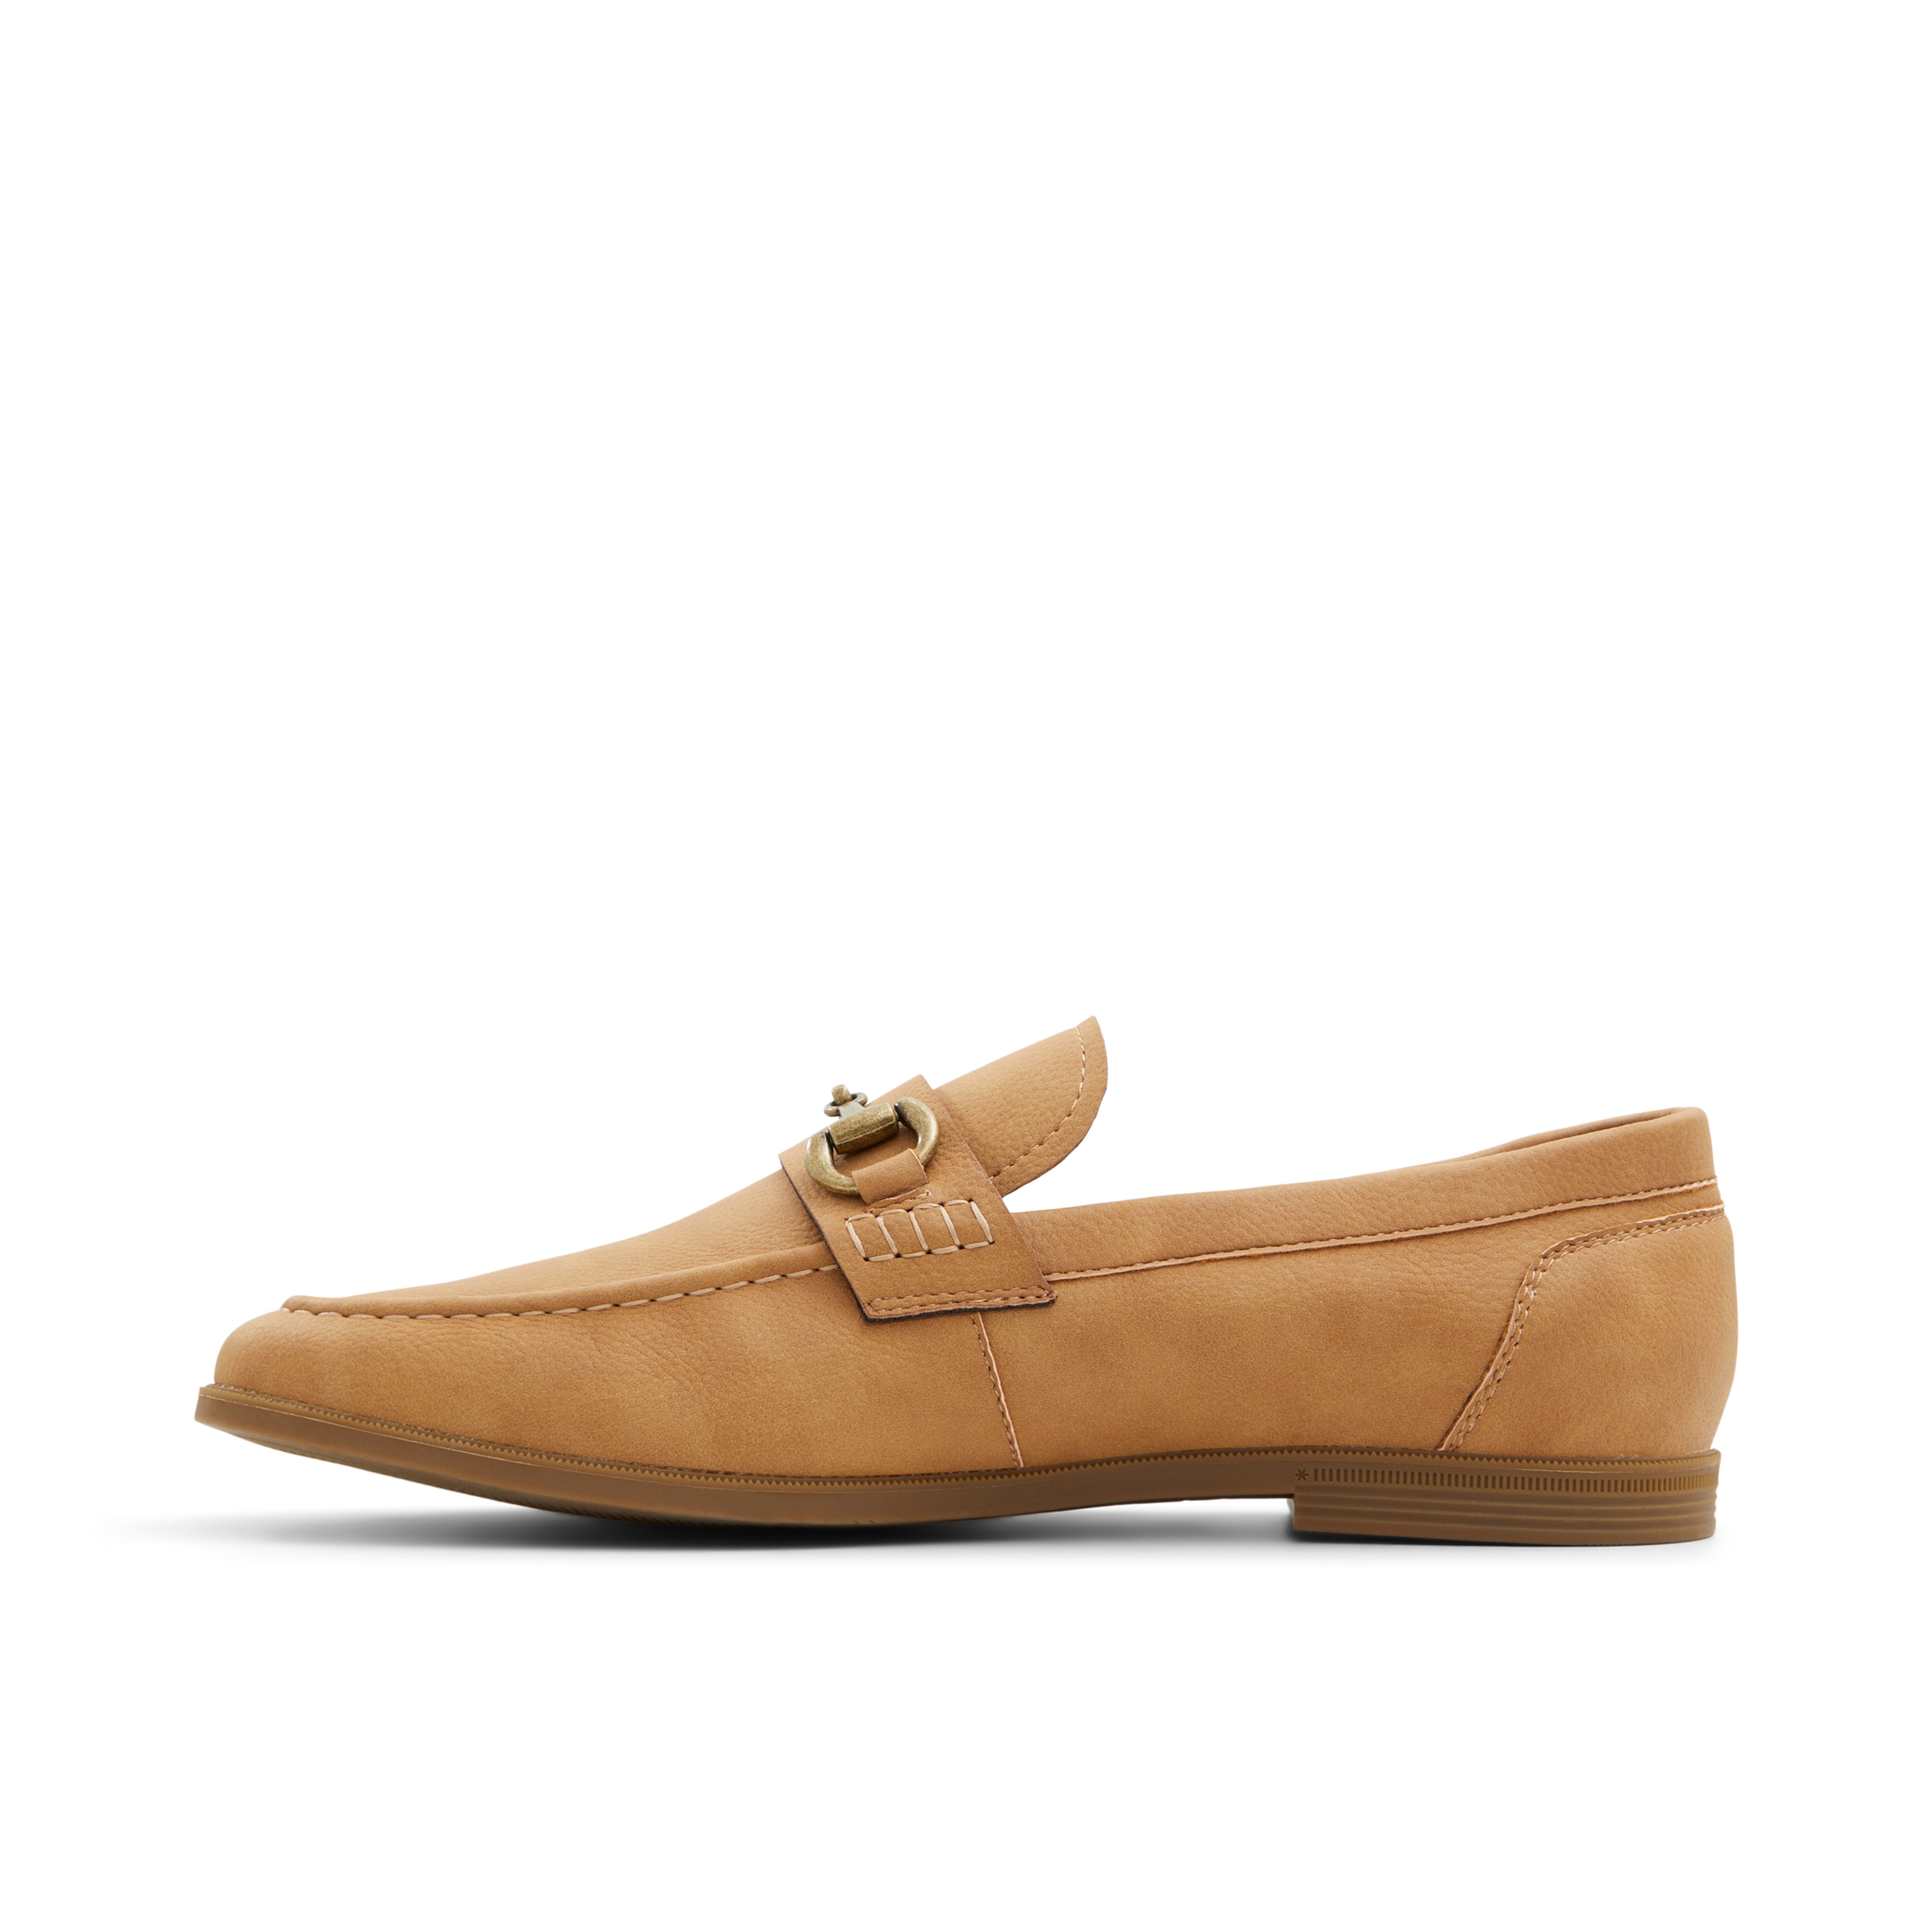 Pine Penny loafers